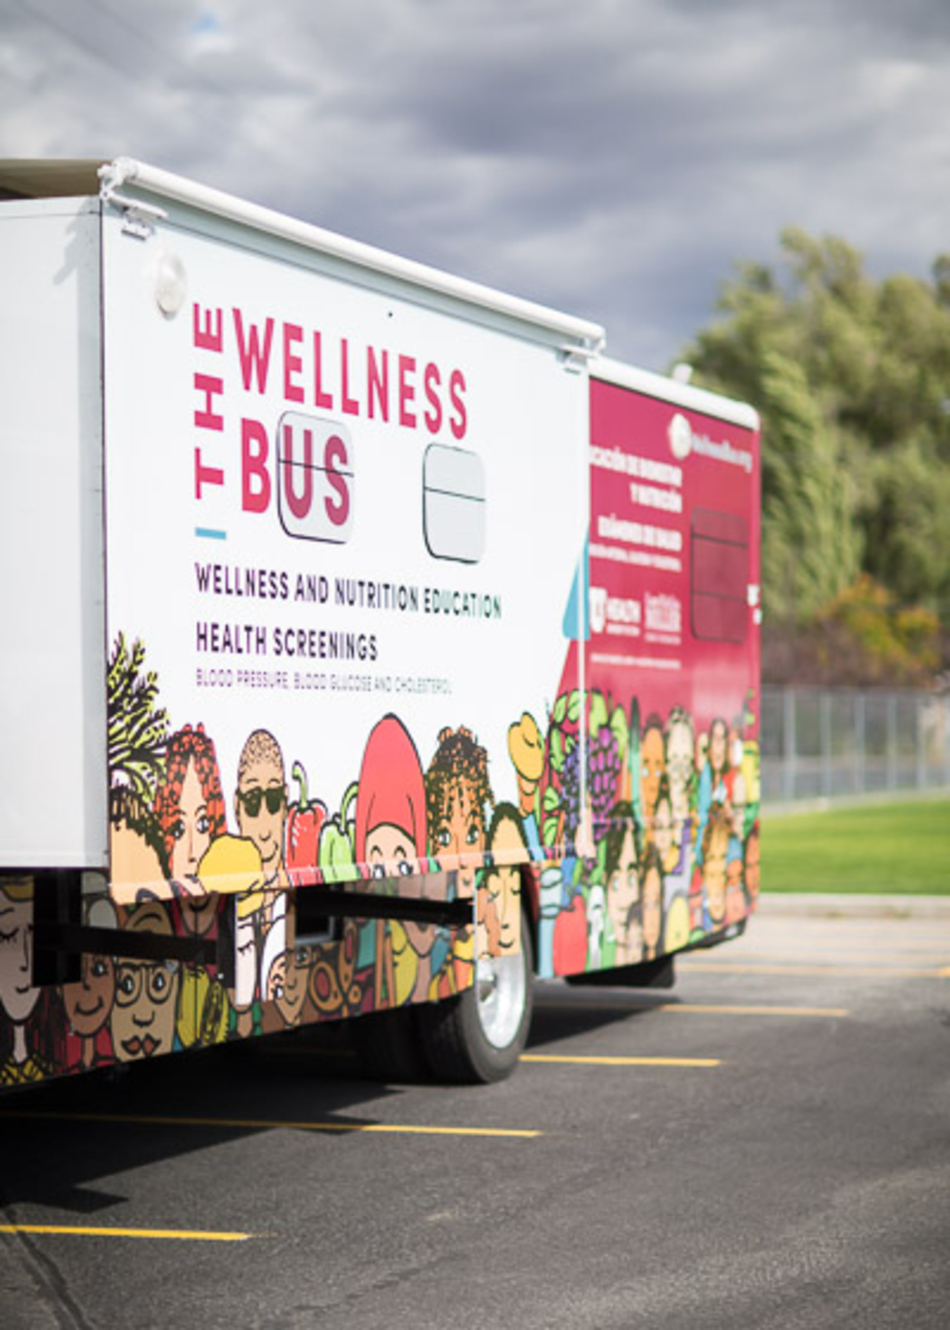 The Wellness Bus: Free Health Screenings, Coaching, and Education